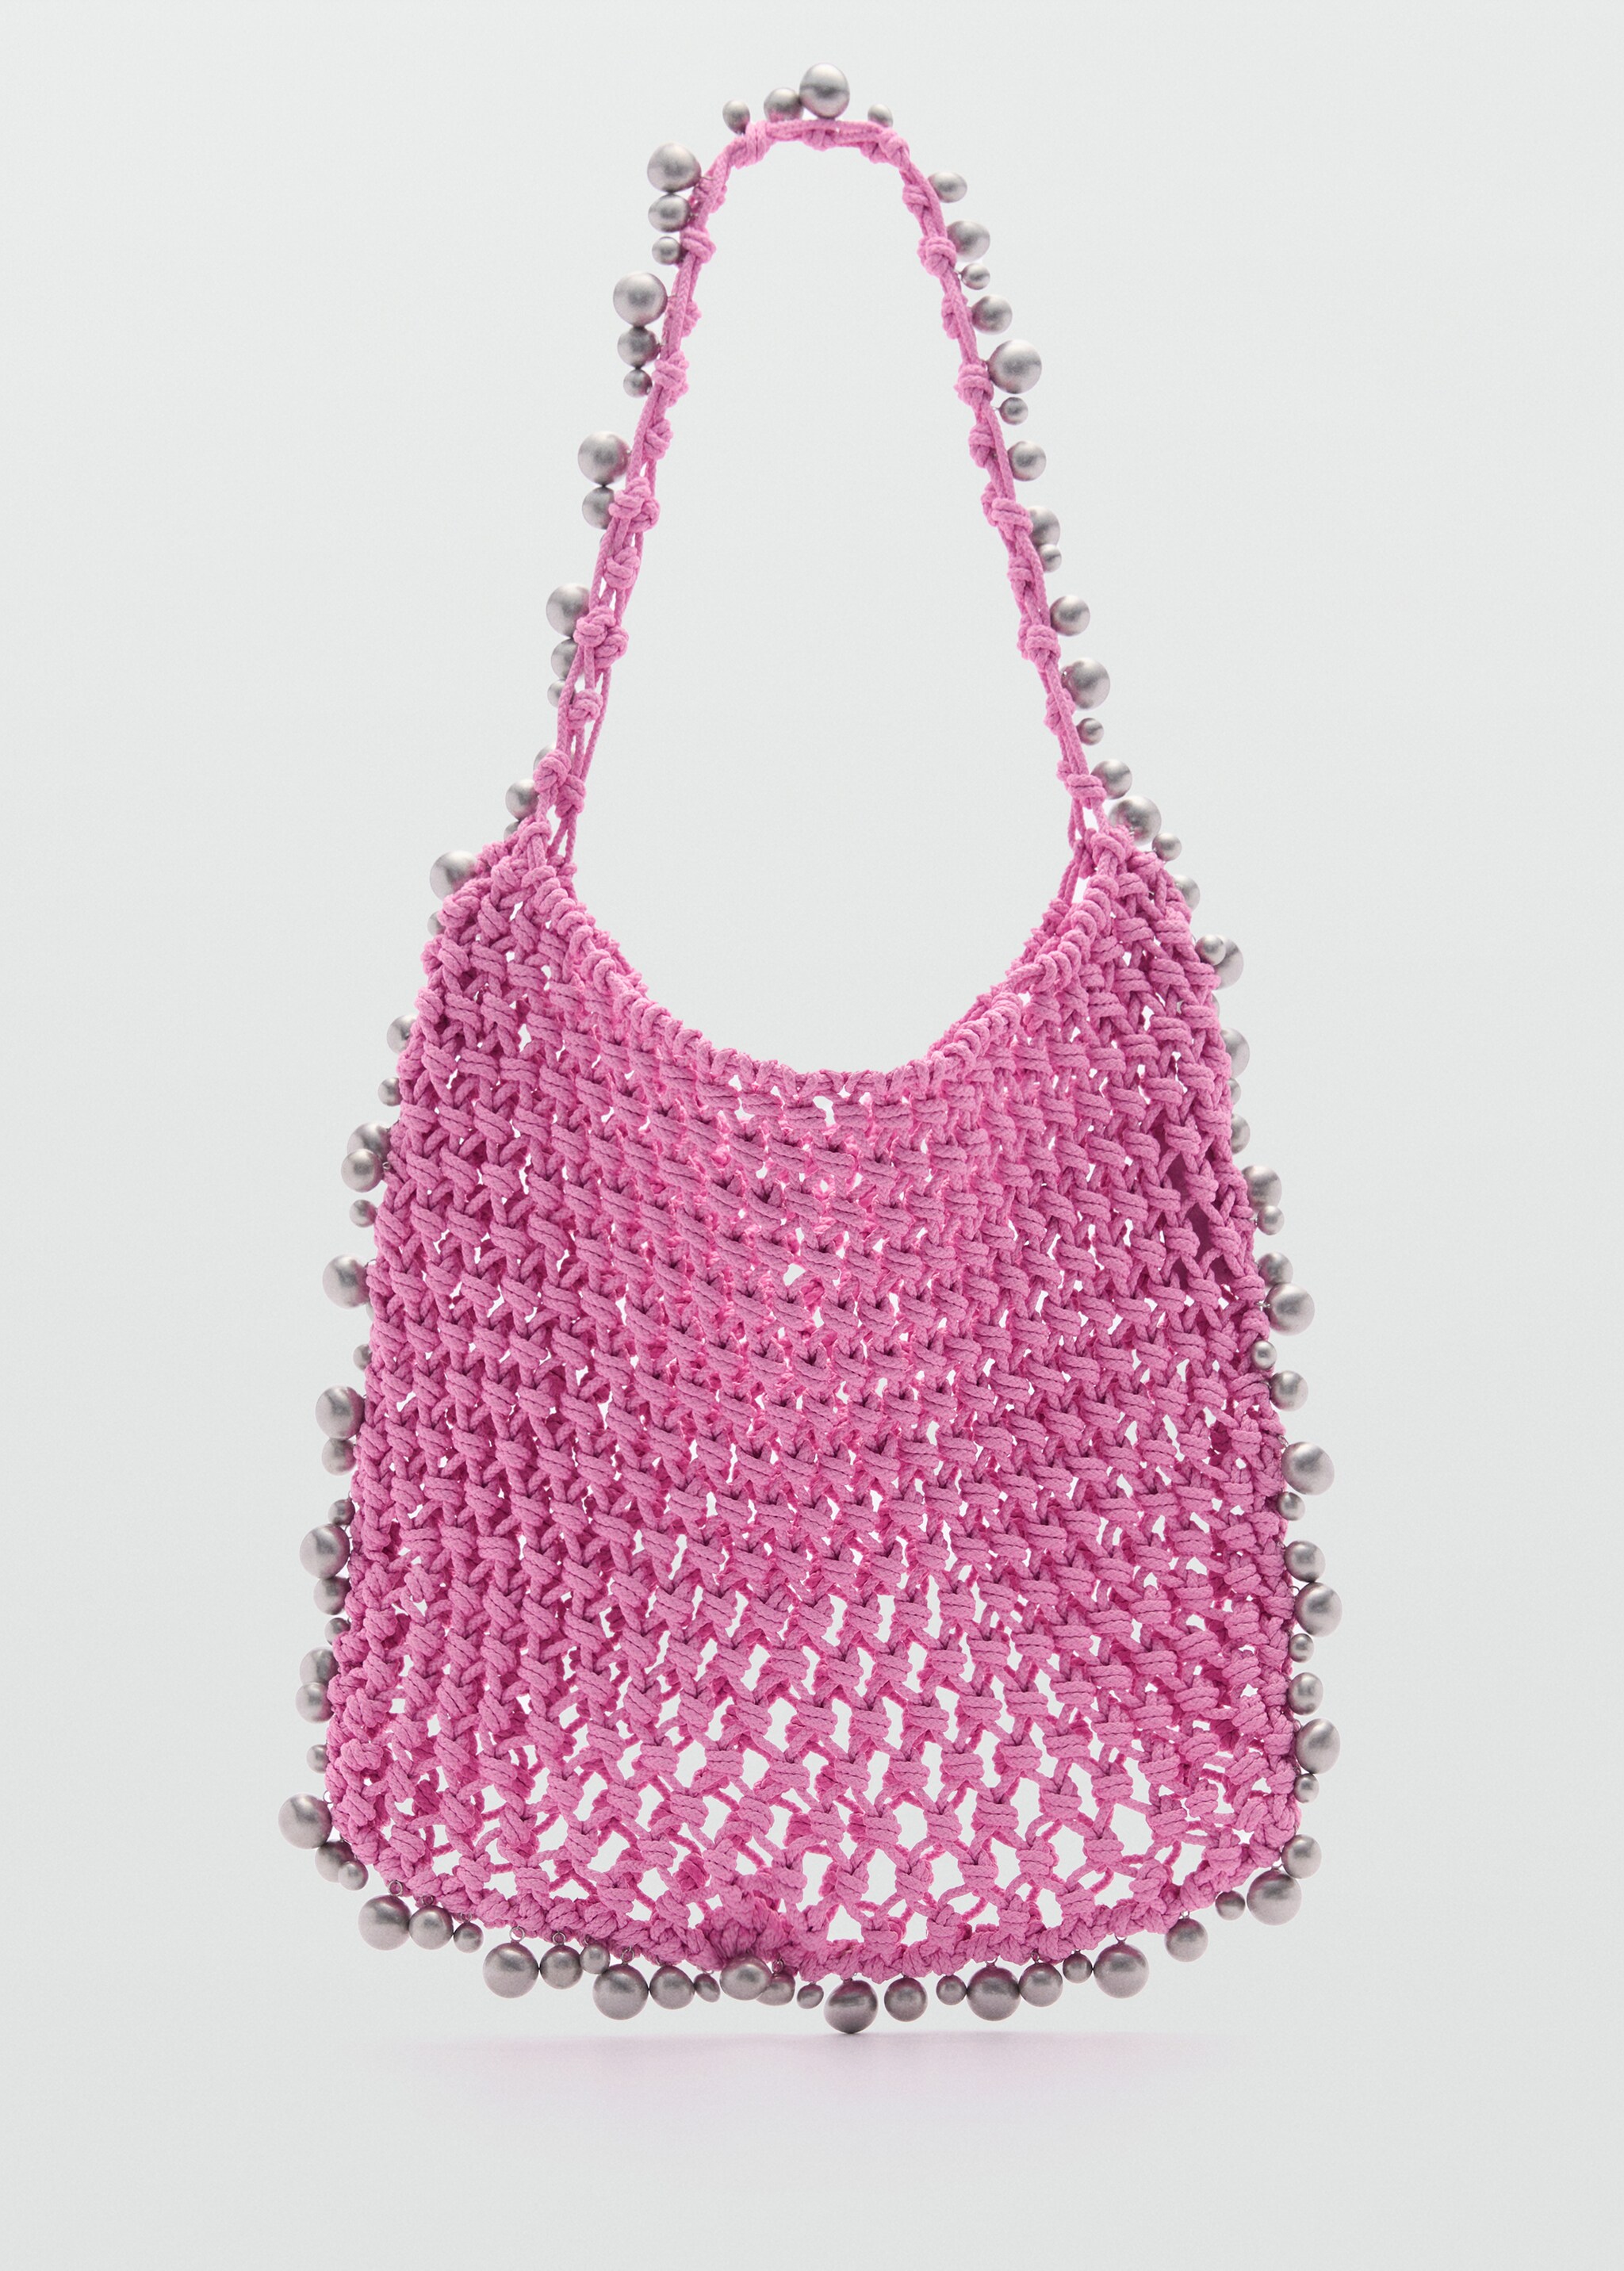 Beaded  bag - Article without model